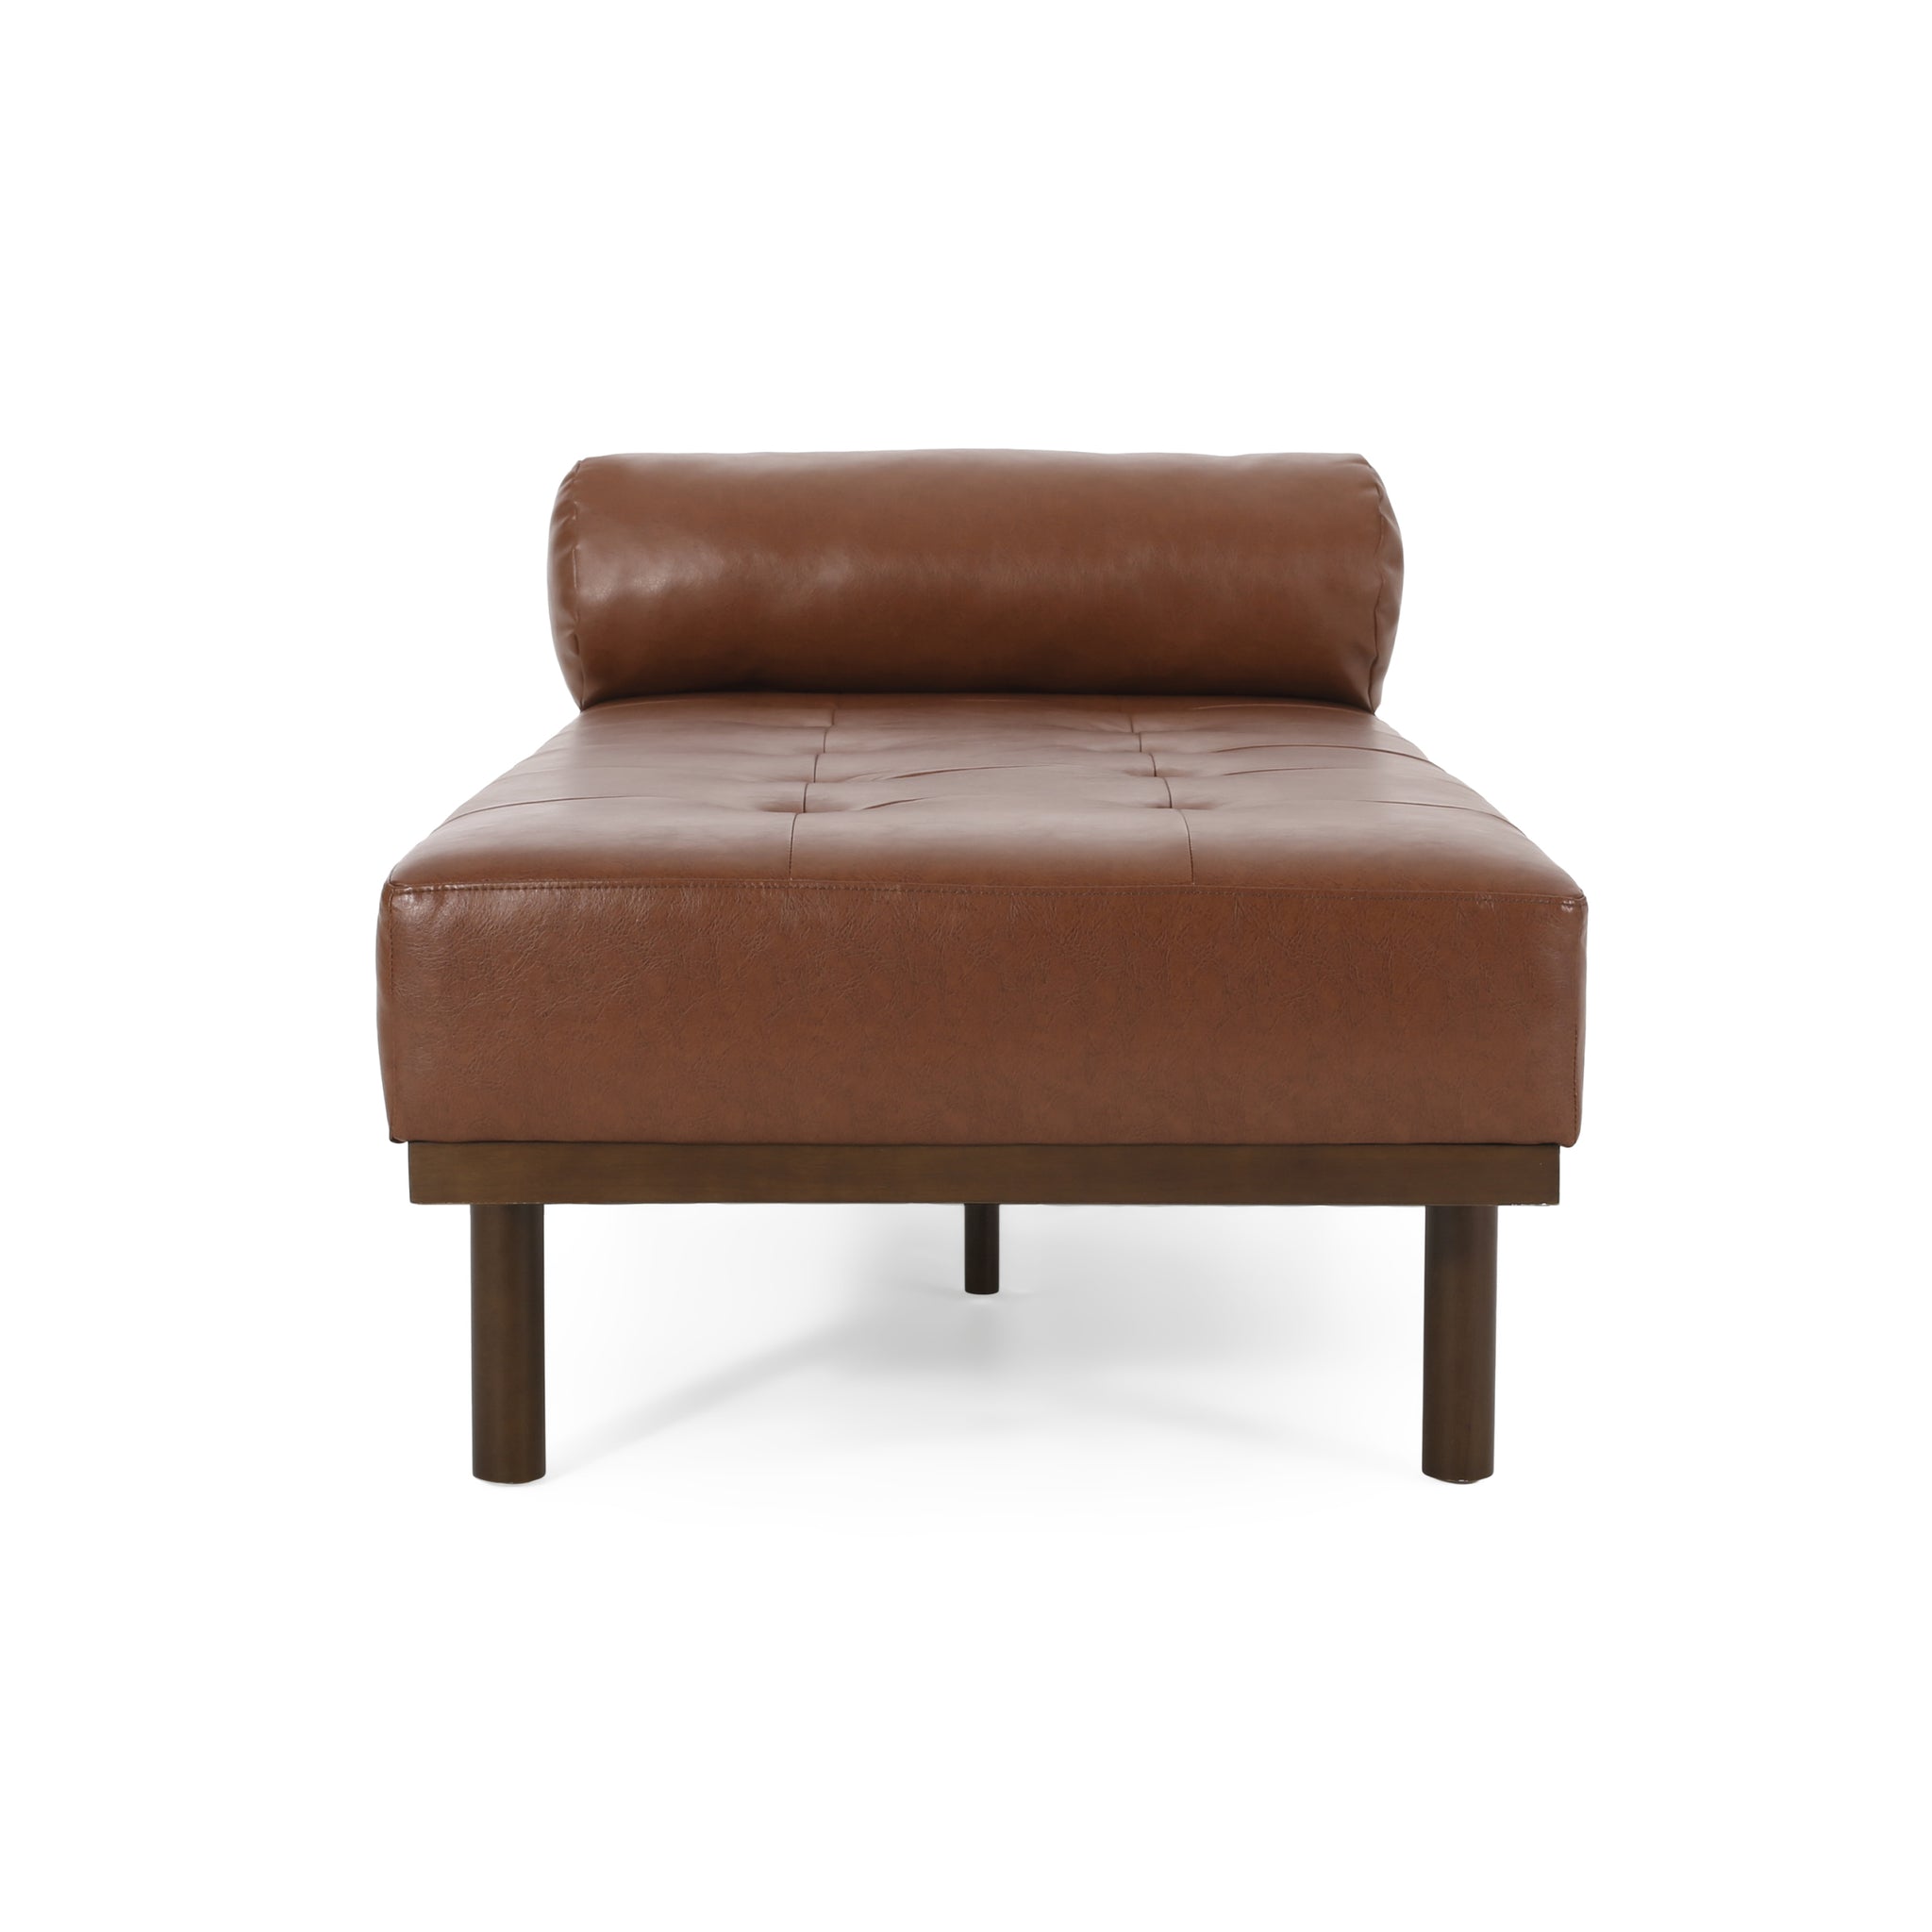 CHAISE LOUNGE light brown-pu leather